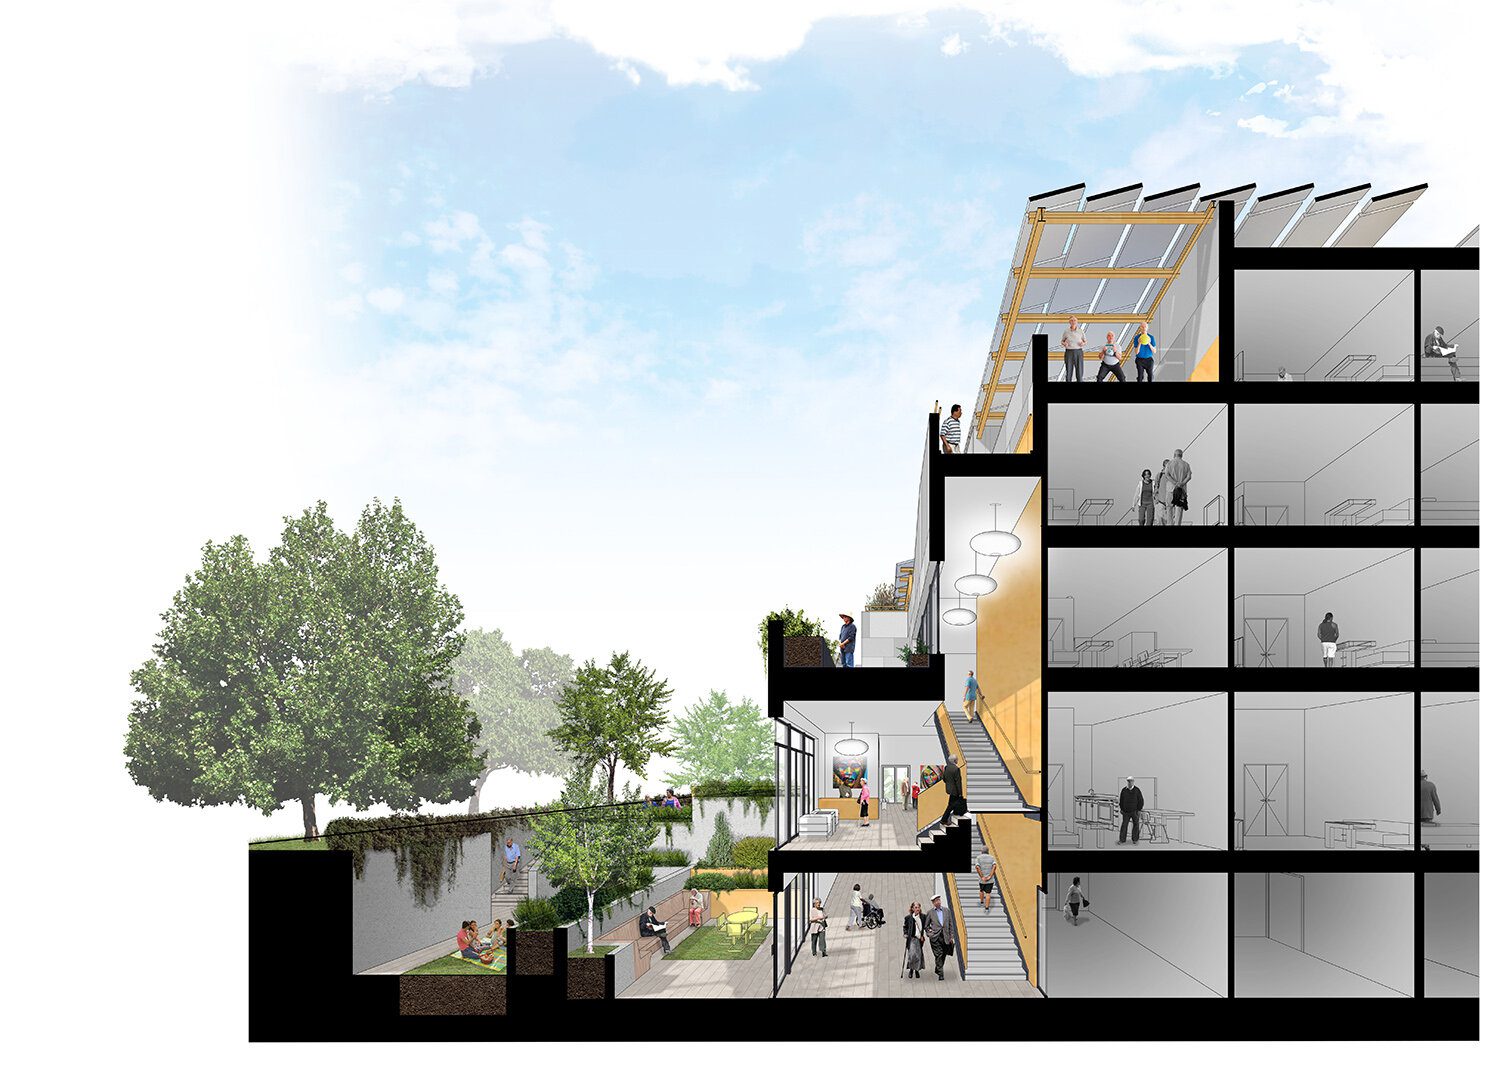 A rendering of a building with people walking around it.